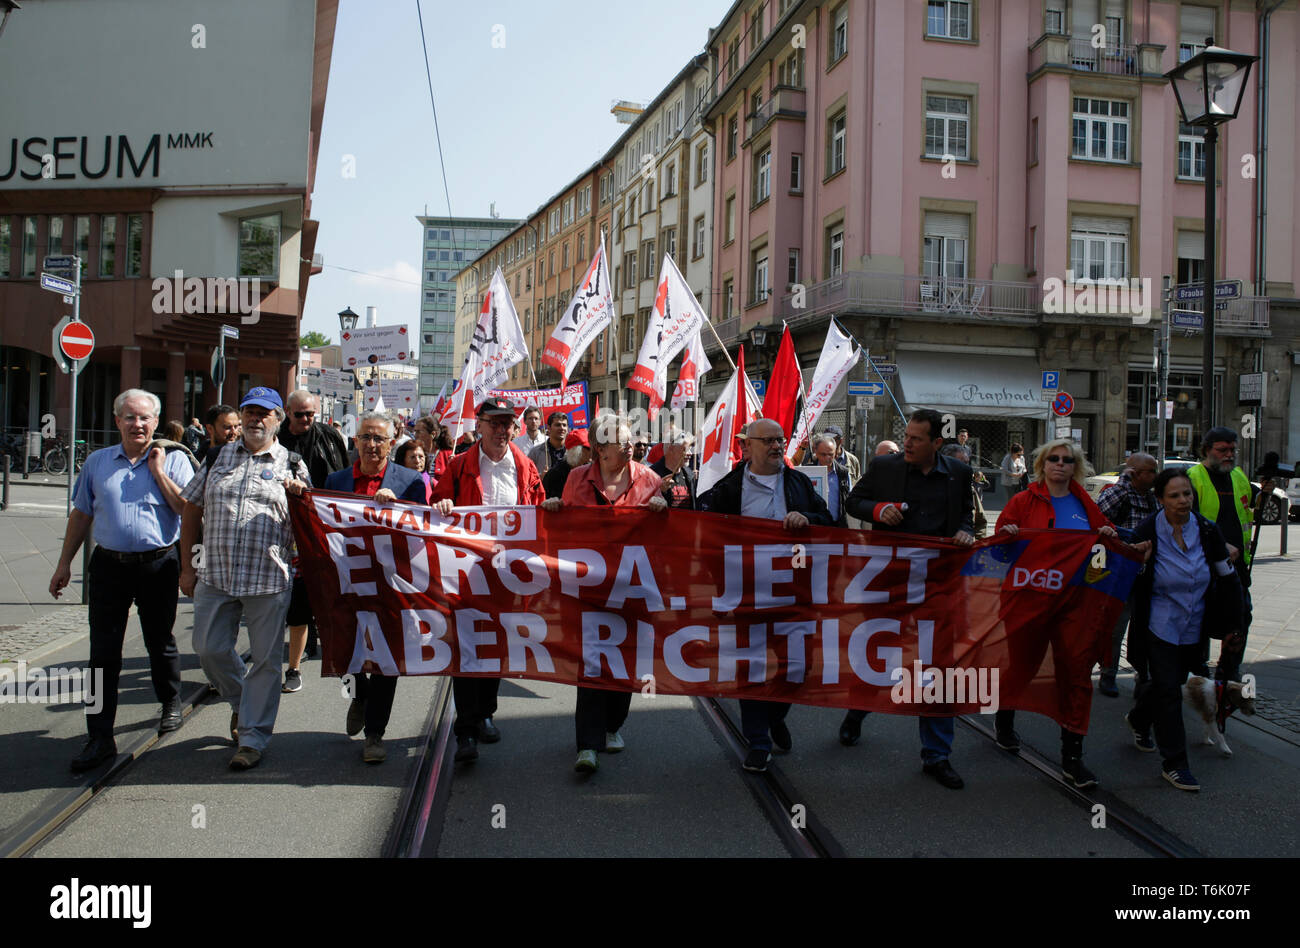 Frankfurt, Germany. 01st May, 2019. The protest march is lead by Philipp Jacks (3nd right), the chairman of the Frankfurt branch of the DGB (German Trade Union Confederation) and Marlis Tepe (5th left), the federal chairwoman of the GEW (Education and Science Workers' Union) Several thousand members of Trade Unions and left parties marched through Frankfurt on their traditional 1. May protest. The march ended with a rally at the Roemerberg, in the centre of the old part of Frankfurt in front of the Frankfurt city-hall Roemer. Credit: Michael Debets/Pacific Press/Alamy Live News Stock Photo